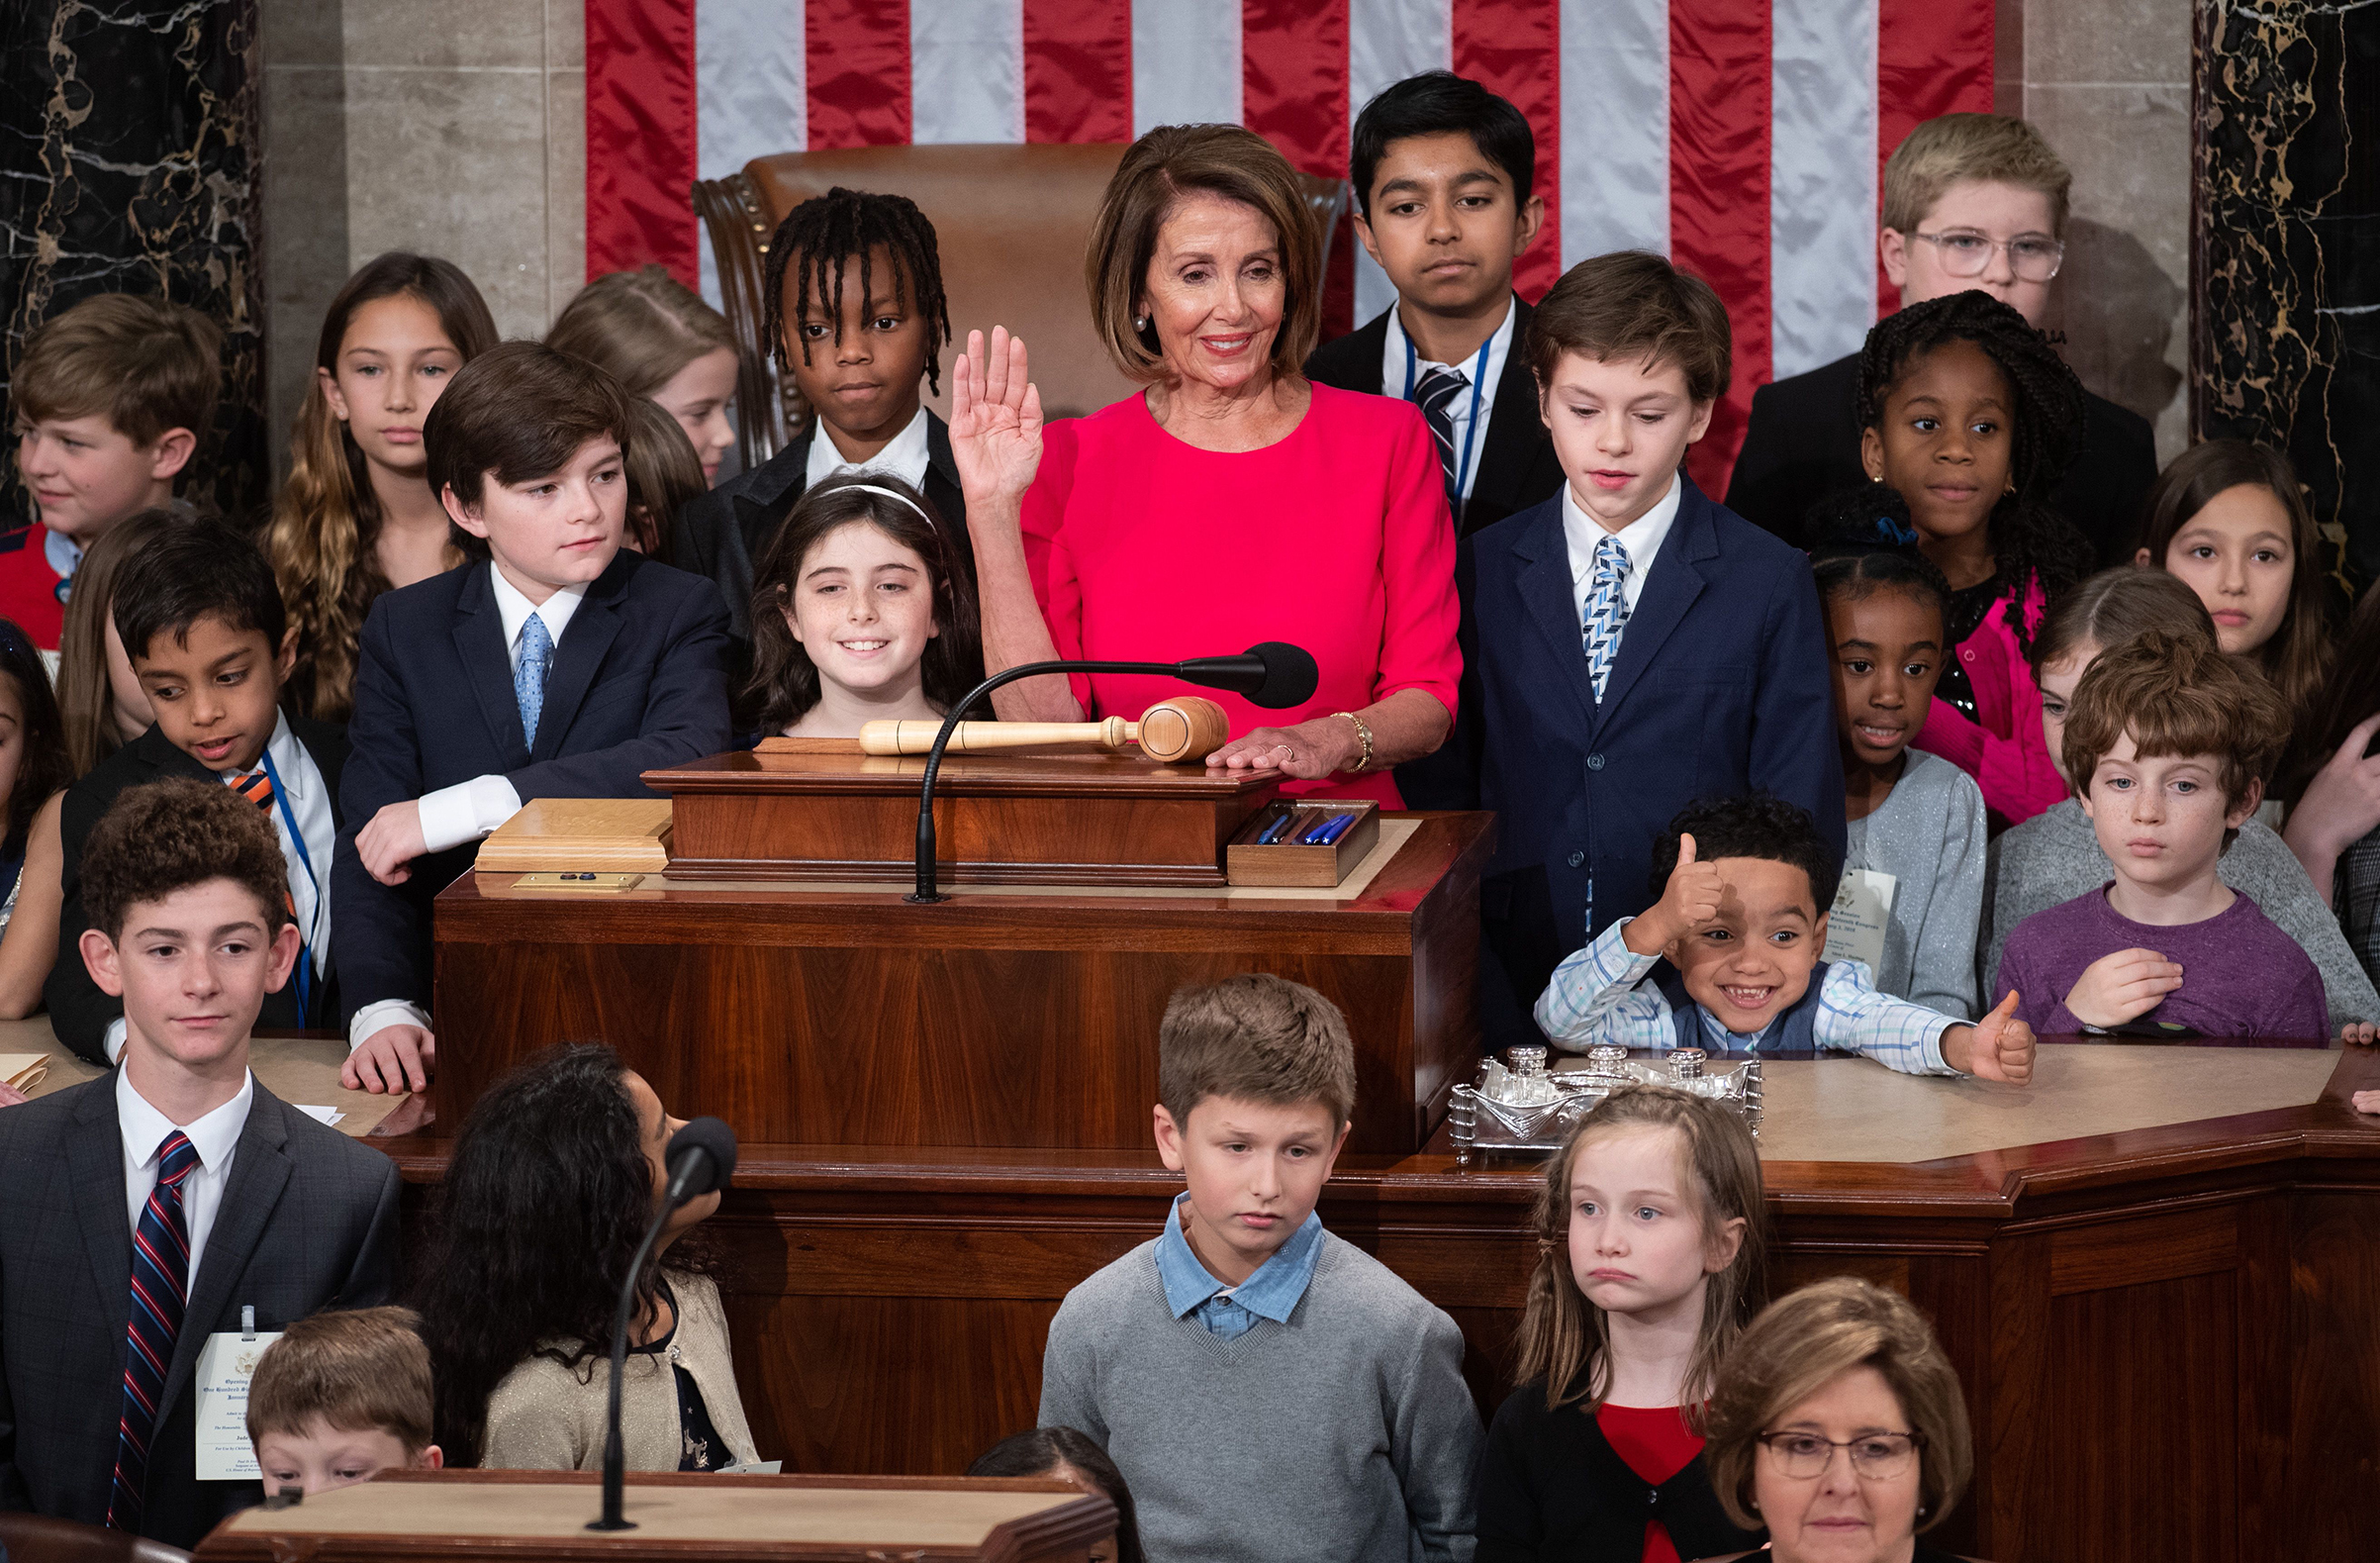 Incoming House Speaker Nancy Pelosi, surrounded by children and grandchildren of lawmakers, takes the oath at the closing of the 116th Congress at the US Capitol in Washington, on Jan. 3, 2019. (Saul Loeb—AFP/Getty Images)